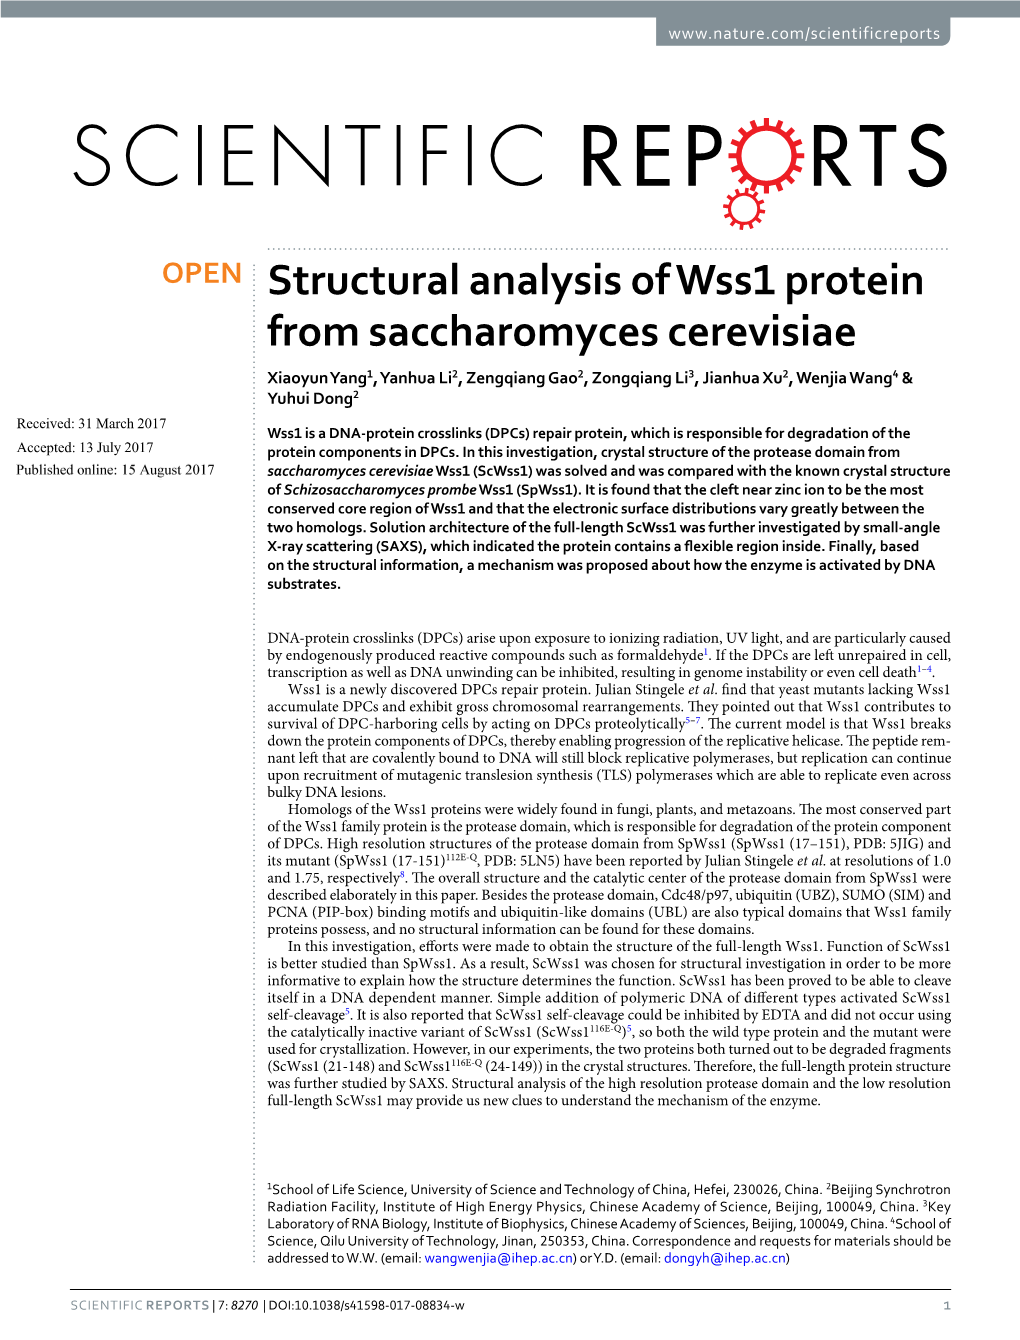 Structural Analysis of Wss1 Protein from Saccharomyces Cerevisiae